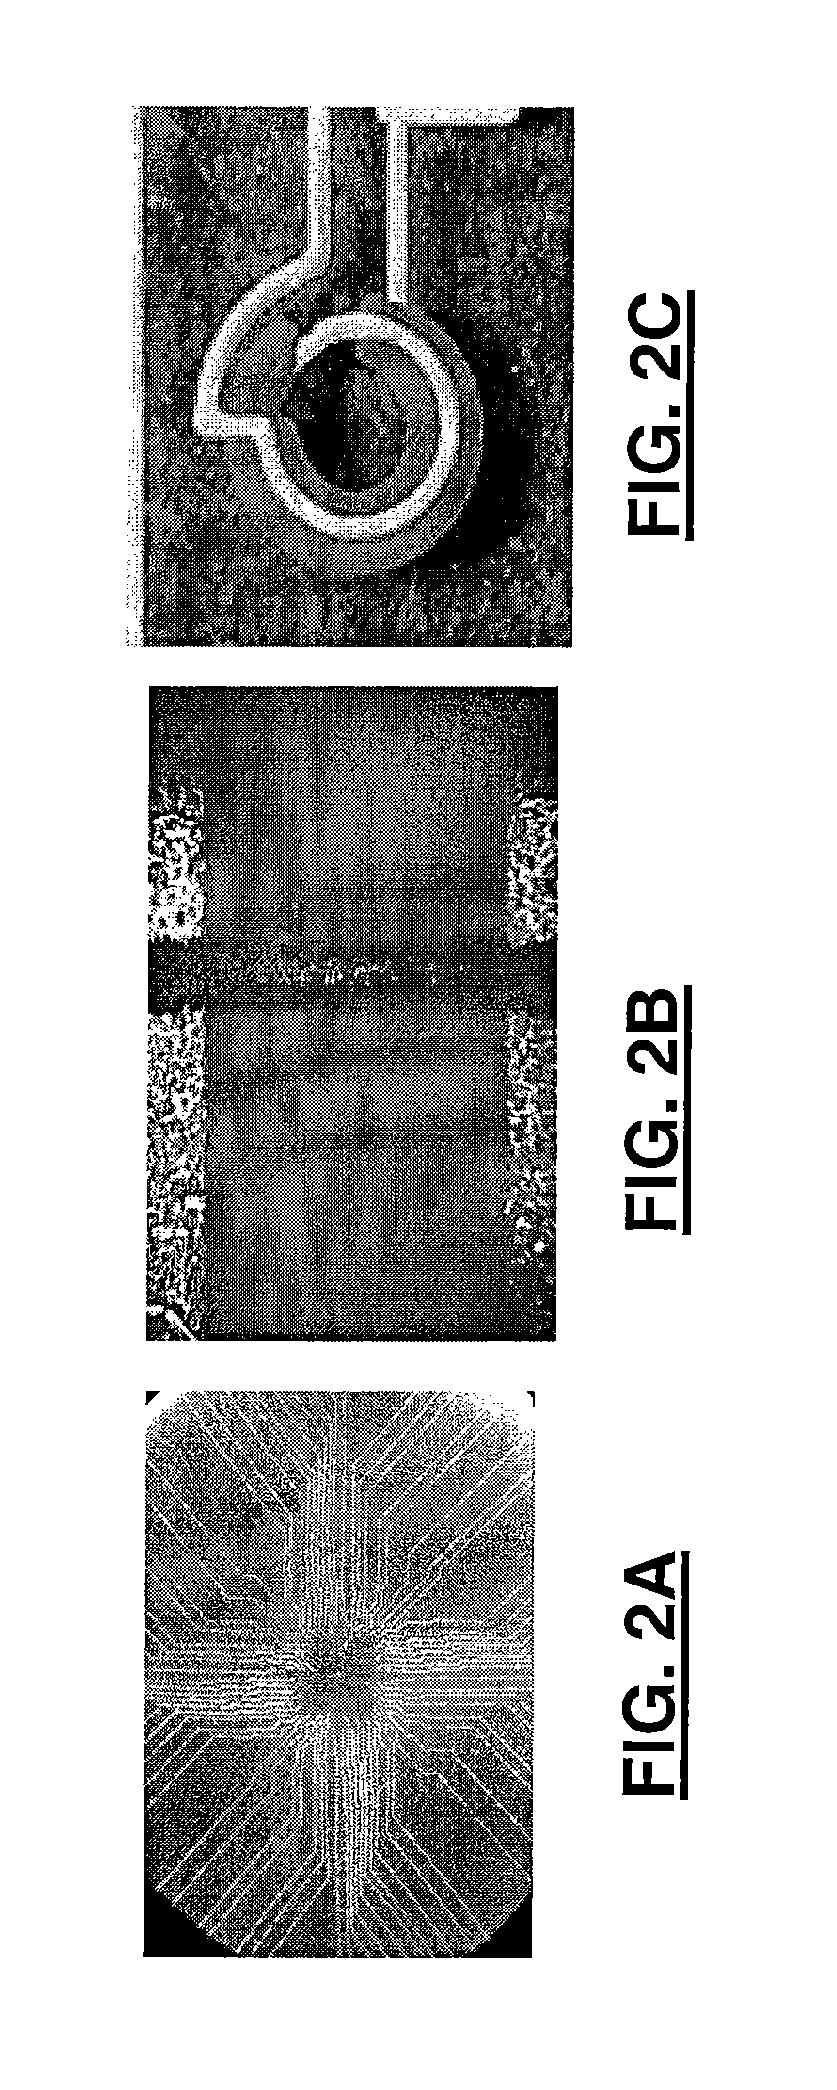 Method for manufacturing 3D circuits from bare die or packaged IC chips by microdispensed interconnections